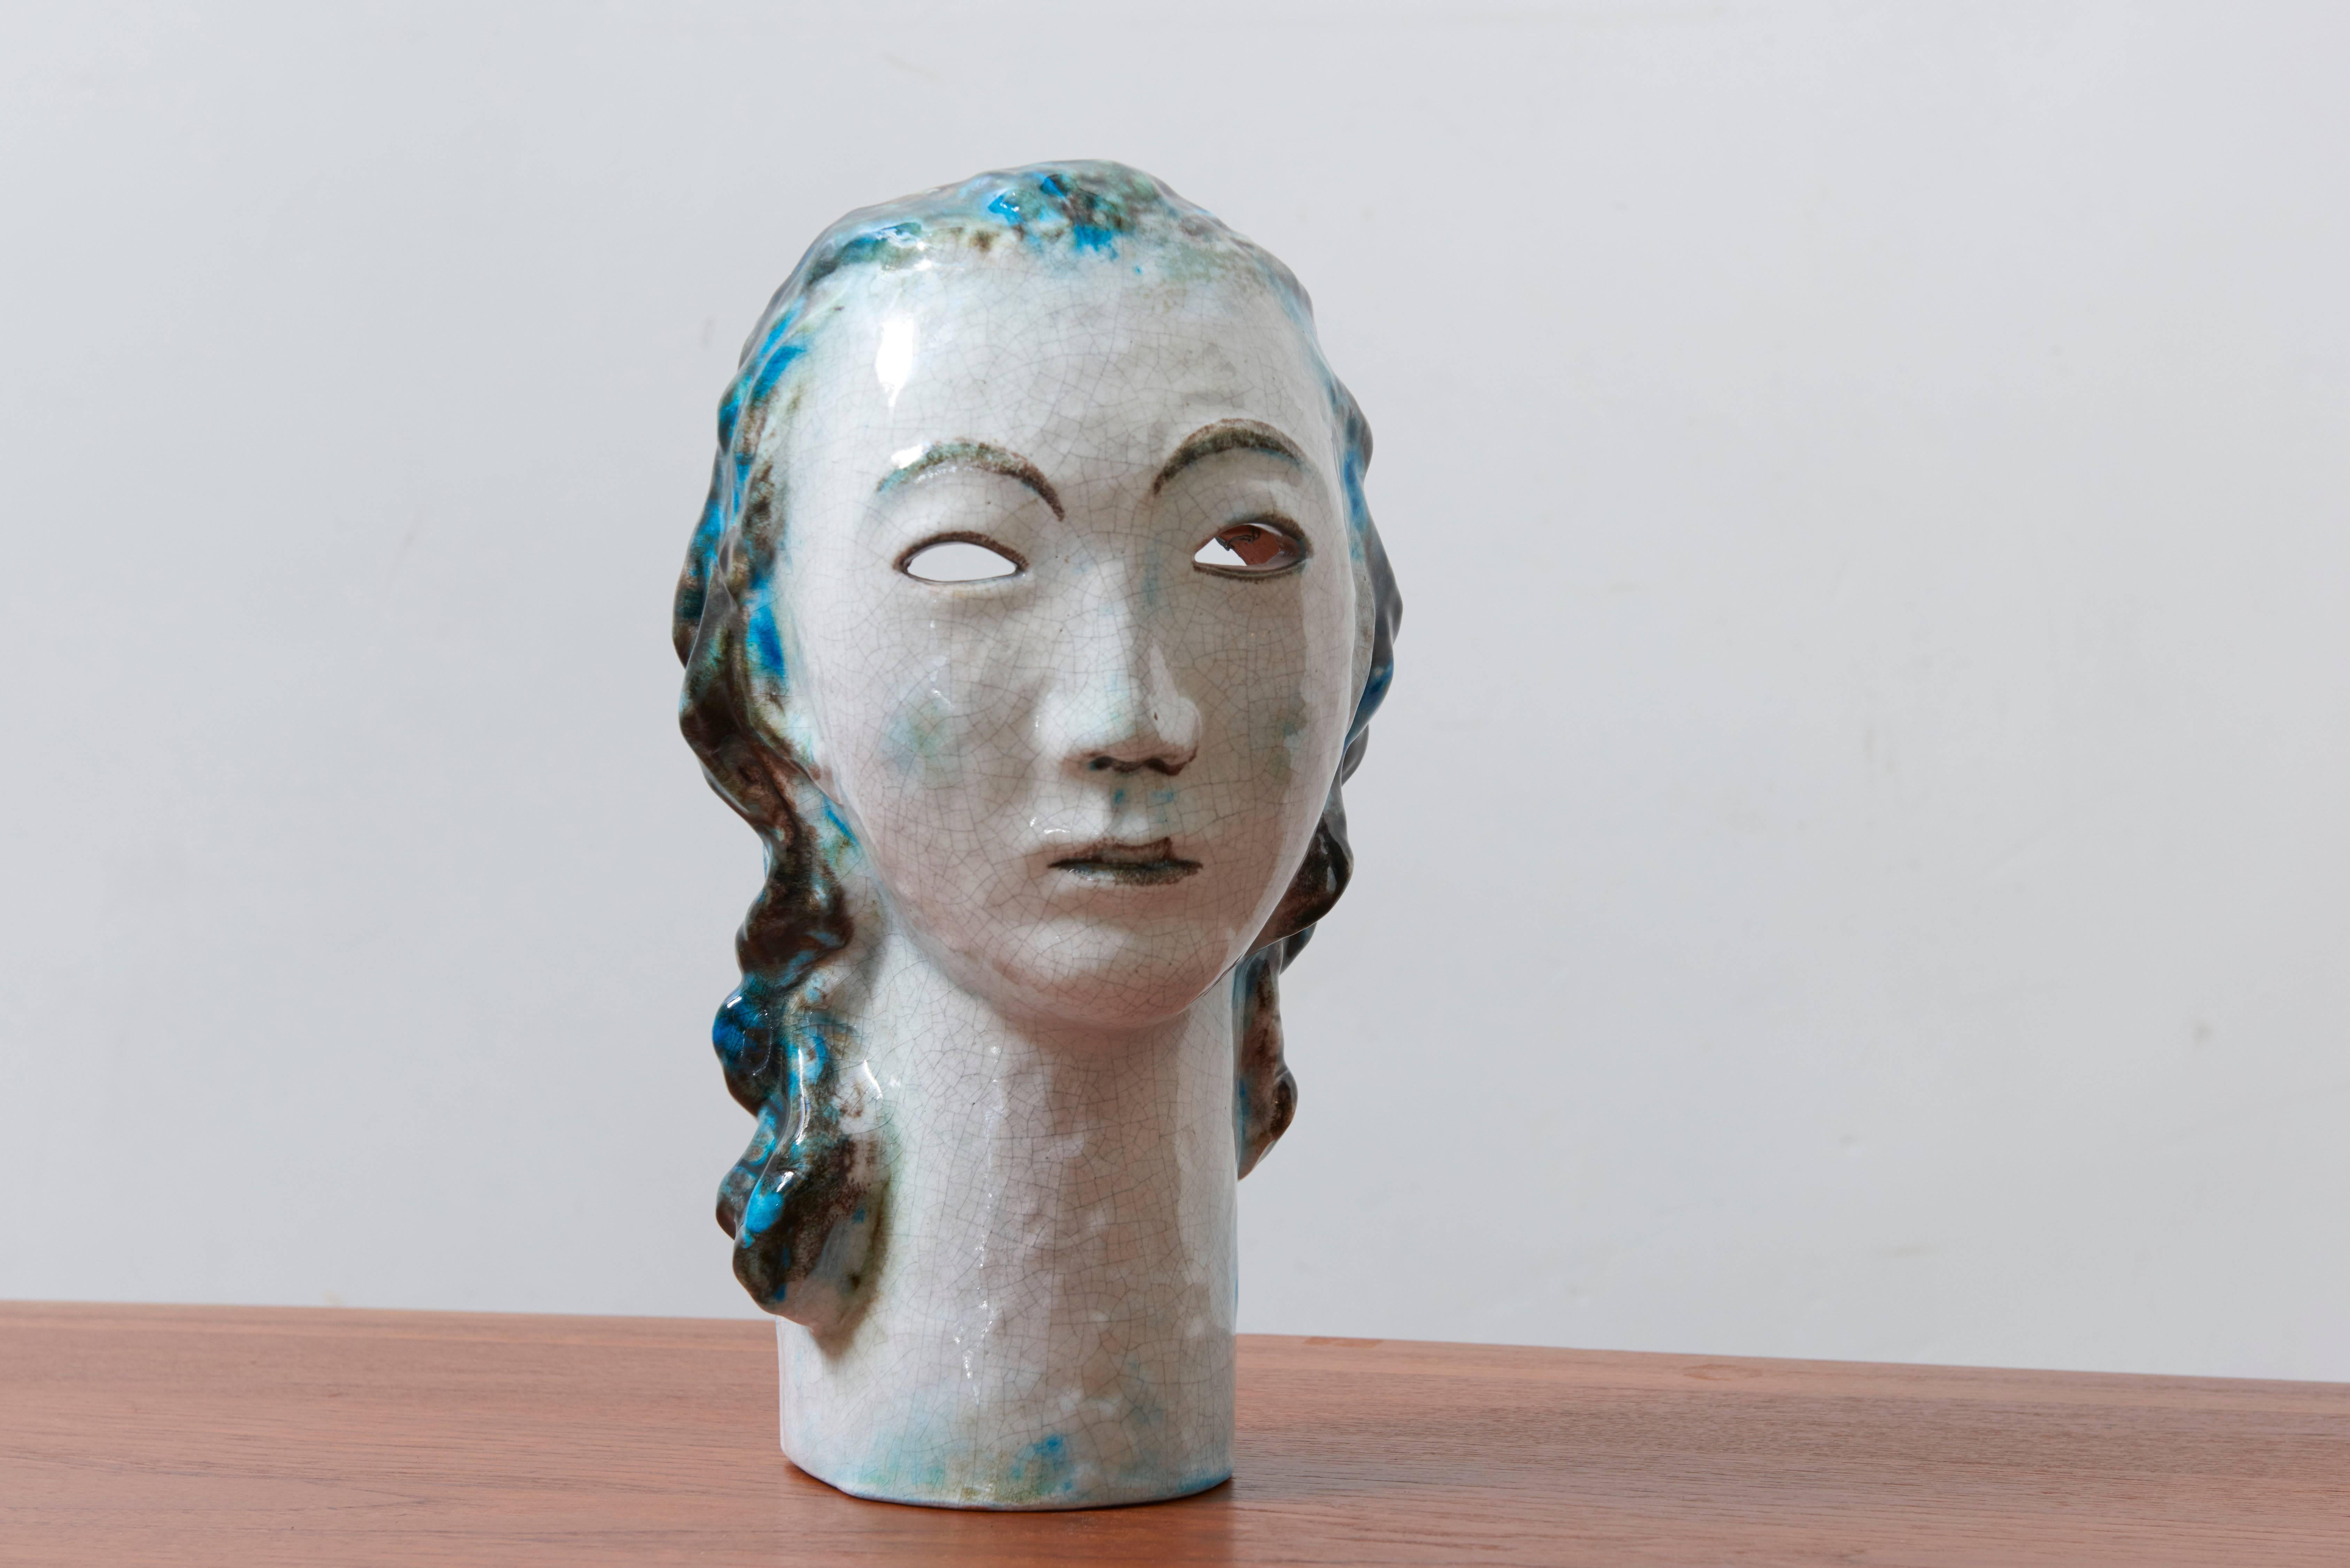 Beautiful sculpture in brown earthenware modeled in the expression of a woman in polychrome glaze with blue hair, made in Germany, 1930s.

Erwin Spuler (1906-1964), who initially studied at the School of Applied Arts in Stuttgart, studied with